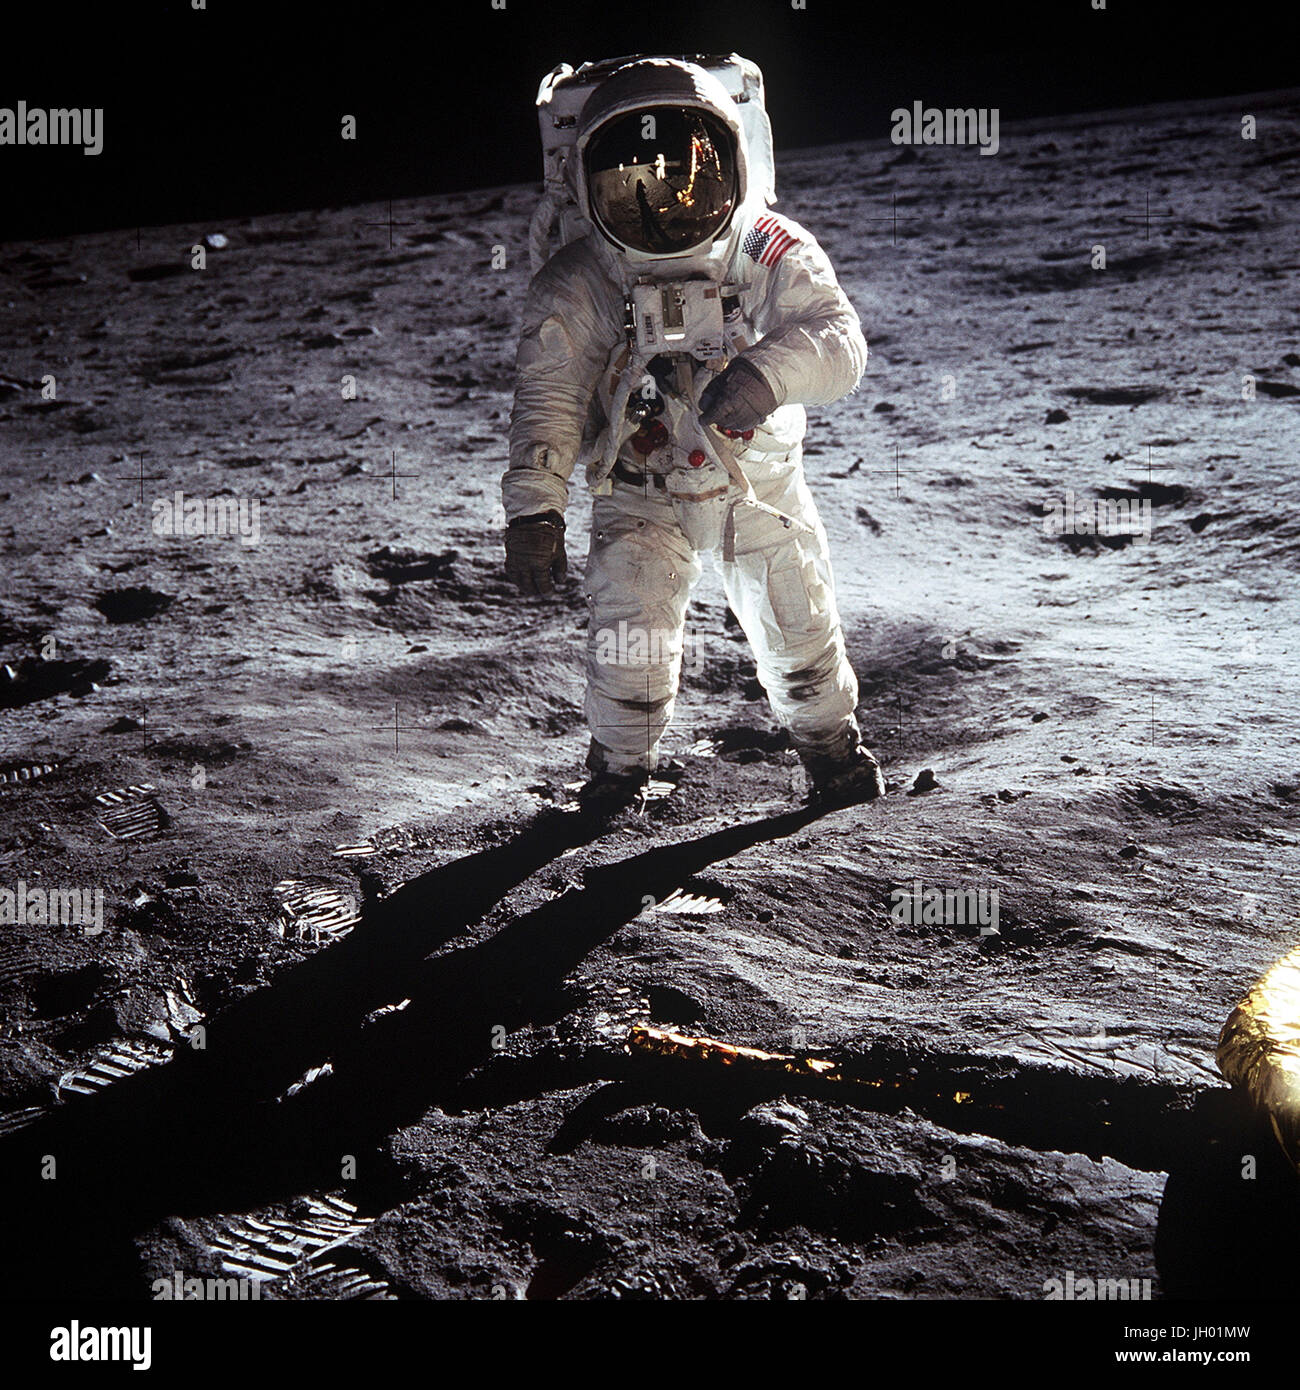 Astronaut Buzz Aldrin, lunar module pilot of the first lunar landing mission, poses for a photograph beside the deployed United States flag during an Apollo 11 Extravehicular Activity (EVA) on the lunar surface. The Lunar Module (LM) is on the left, and the footprints of the astronauts are clearly visible in the soil of the Moon. Astronaut Neil A. Armstrong, commander, took this picture with a 70mm Hasselblad lunar surface camera. While astronauts Armstrong and Aldrin descended in the LM, the 'Eagle', to explore the Sea of Tranquility region of the Moon, astronaut Michael Collins, command mod. Stock Photo